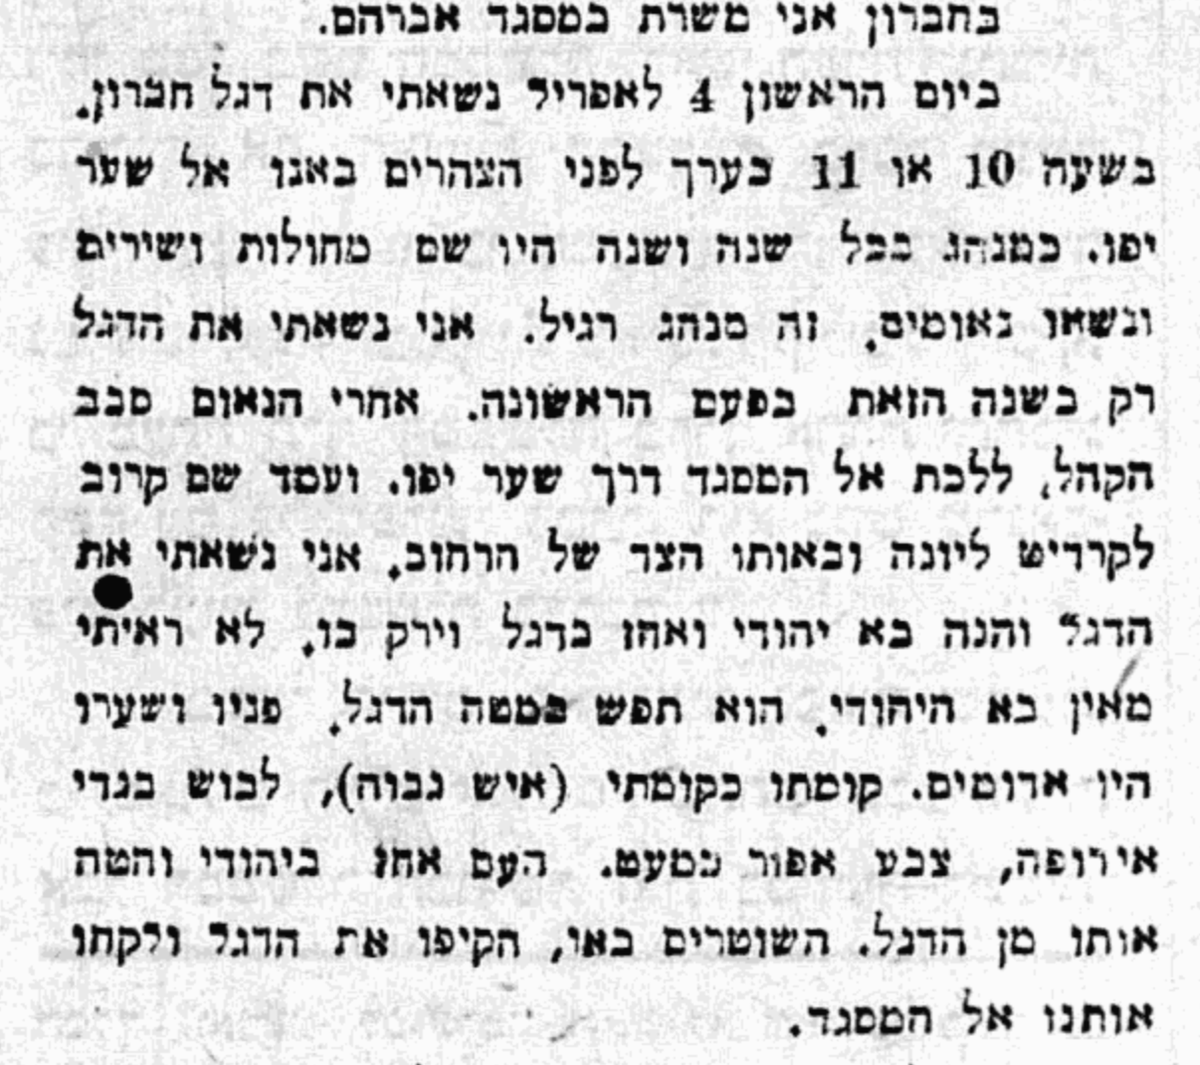 The testimonies of several pilgrims (and at least one British officer) are quoted in Ha'aretz (the newspaper established in 1919). They speak of a conflagration when one "red-faced Jew" tried to grab the Hebron Banner and spat on it.